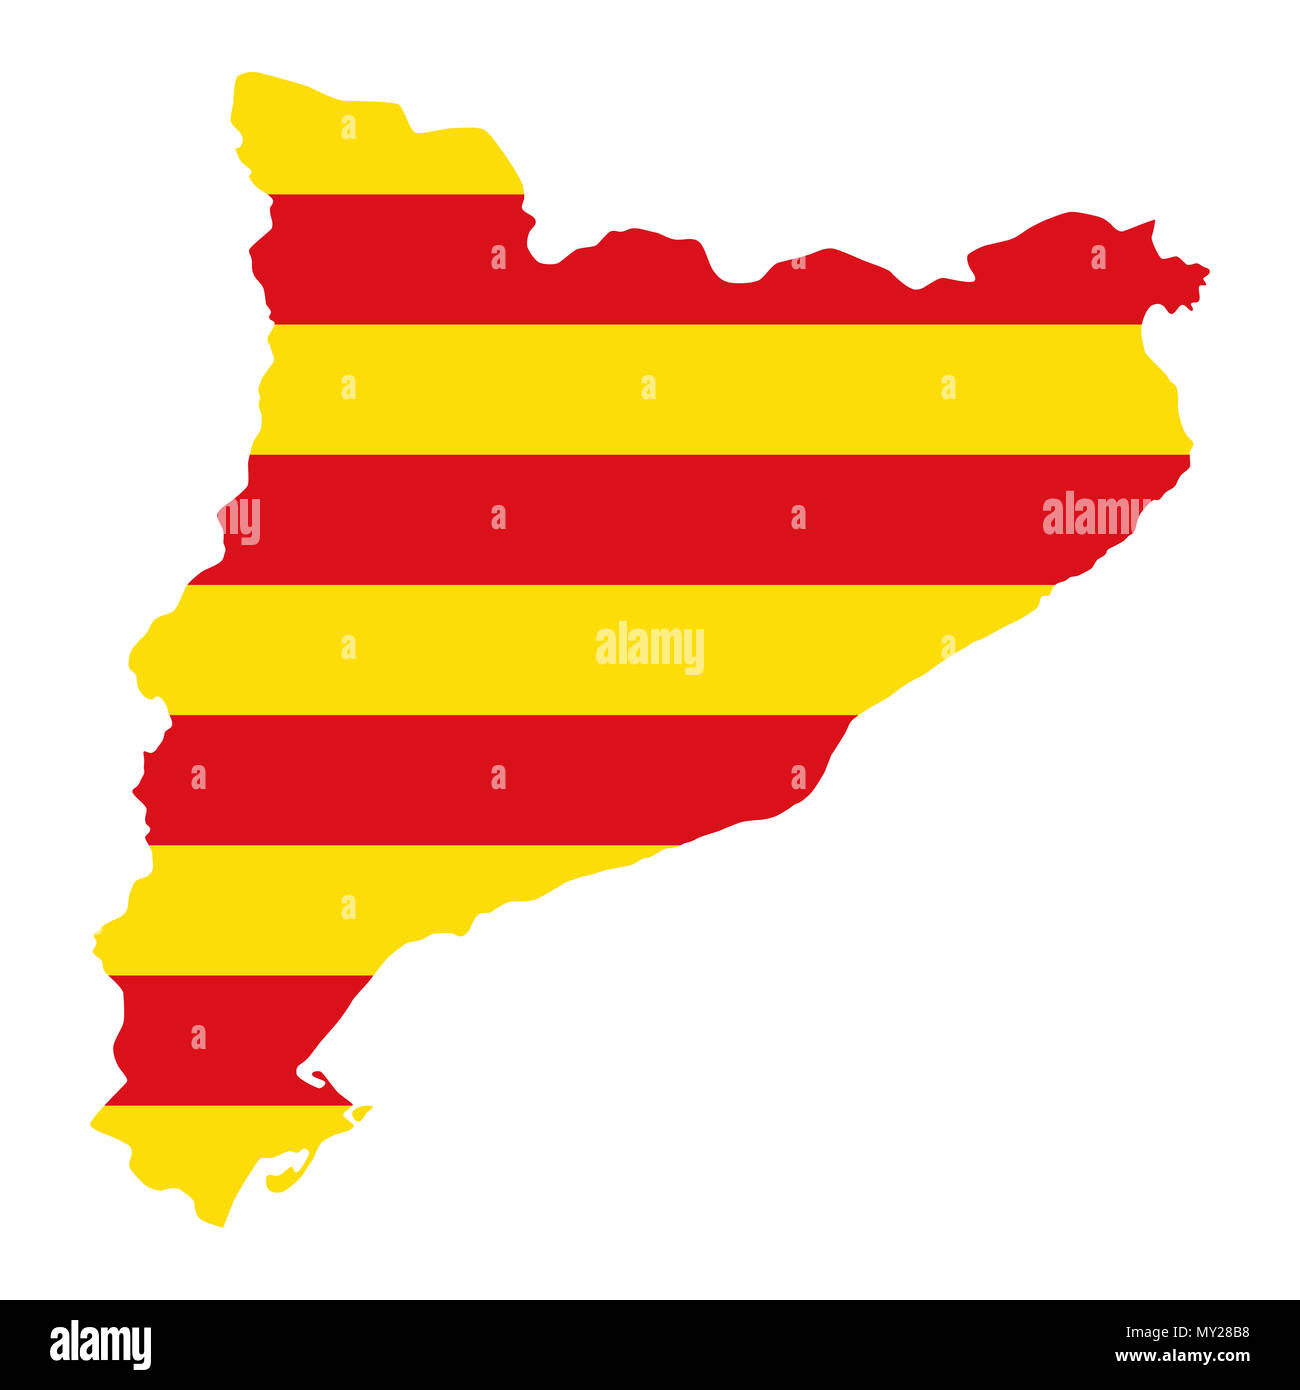 Flag of Catalonia in country silhouette. Senyera, yellow and red horizontal stripes, in the outline of the autonomous community in Spain. Stock Photo